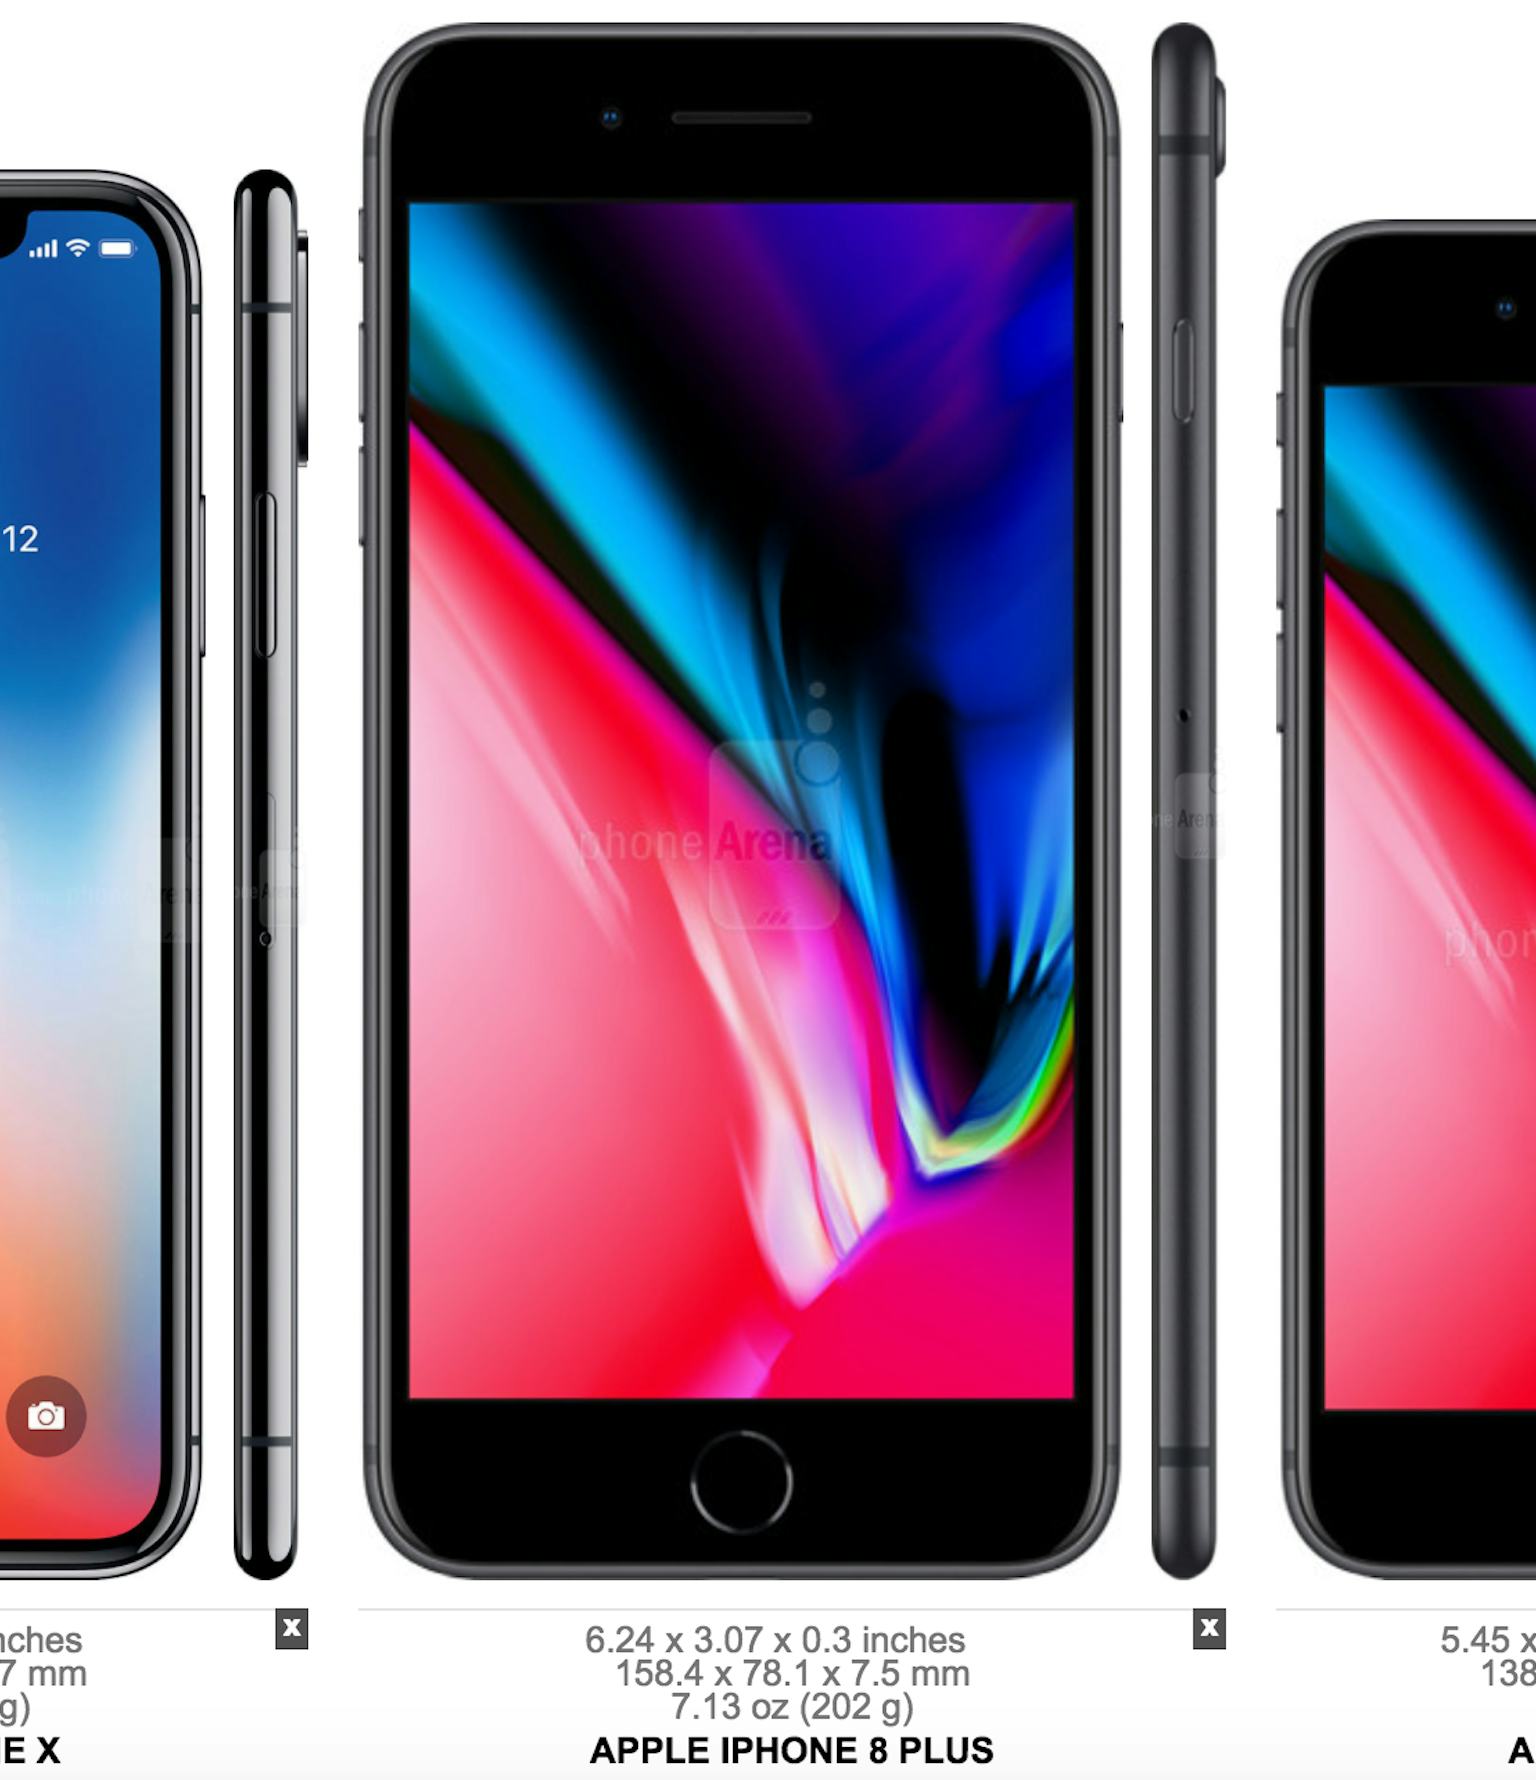 Apple compare. Iphone 10 Size. Iphone x10 Plus. Iphone 8 x Plus. Apple iphone XS vs 8 Plus.